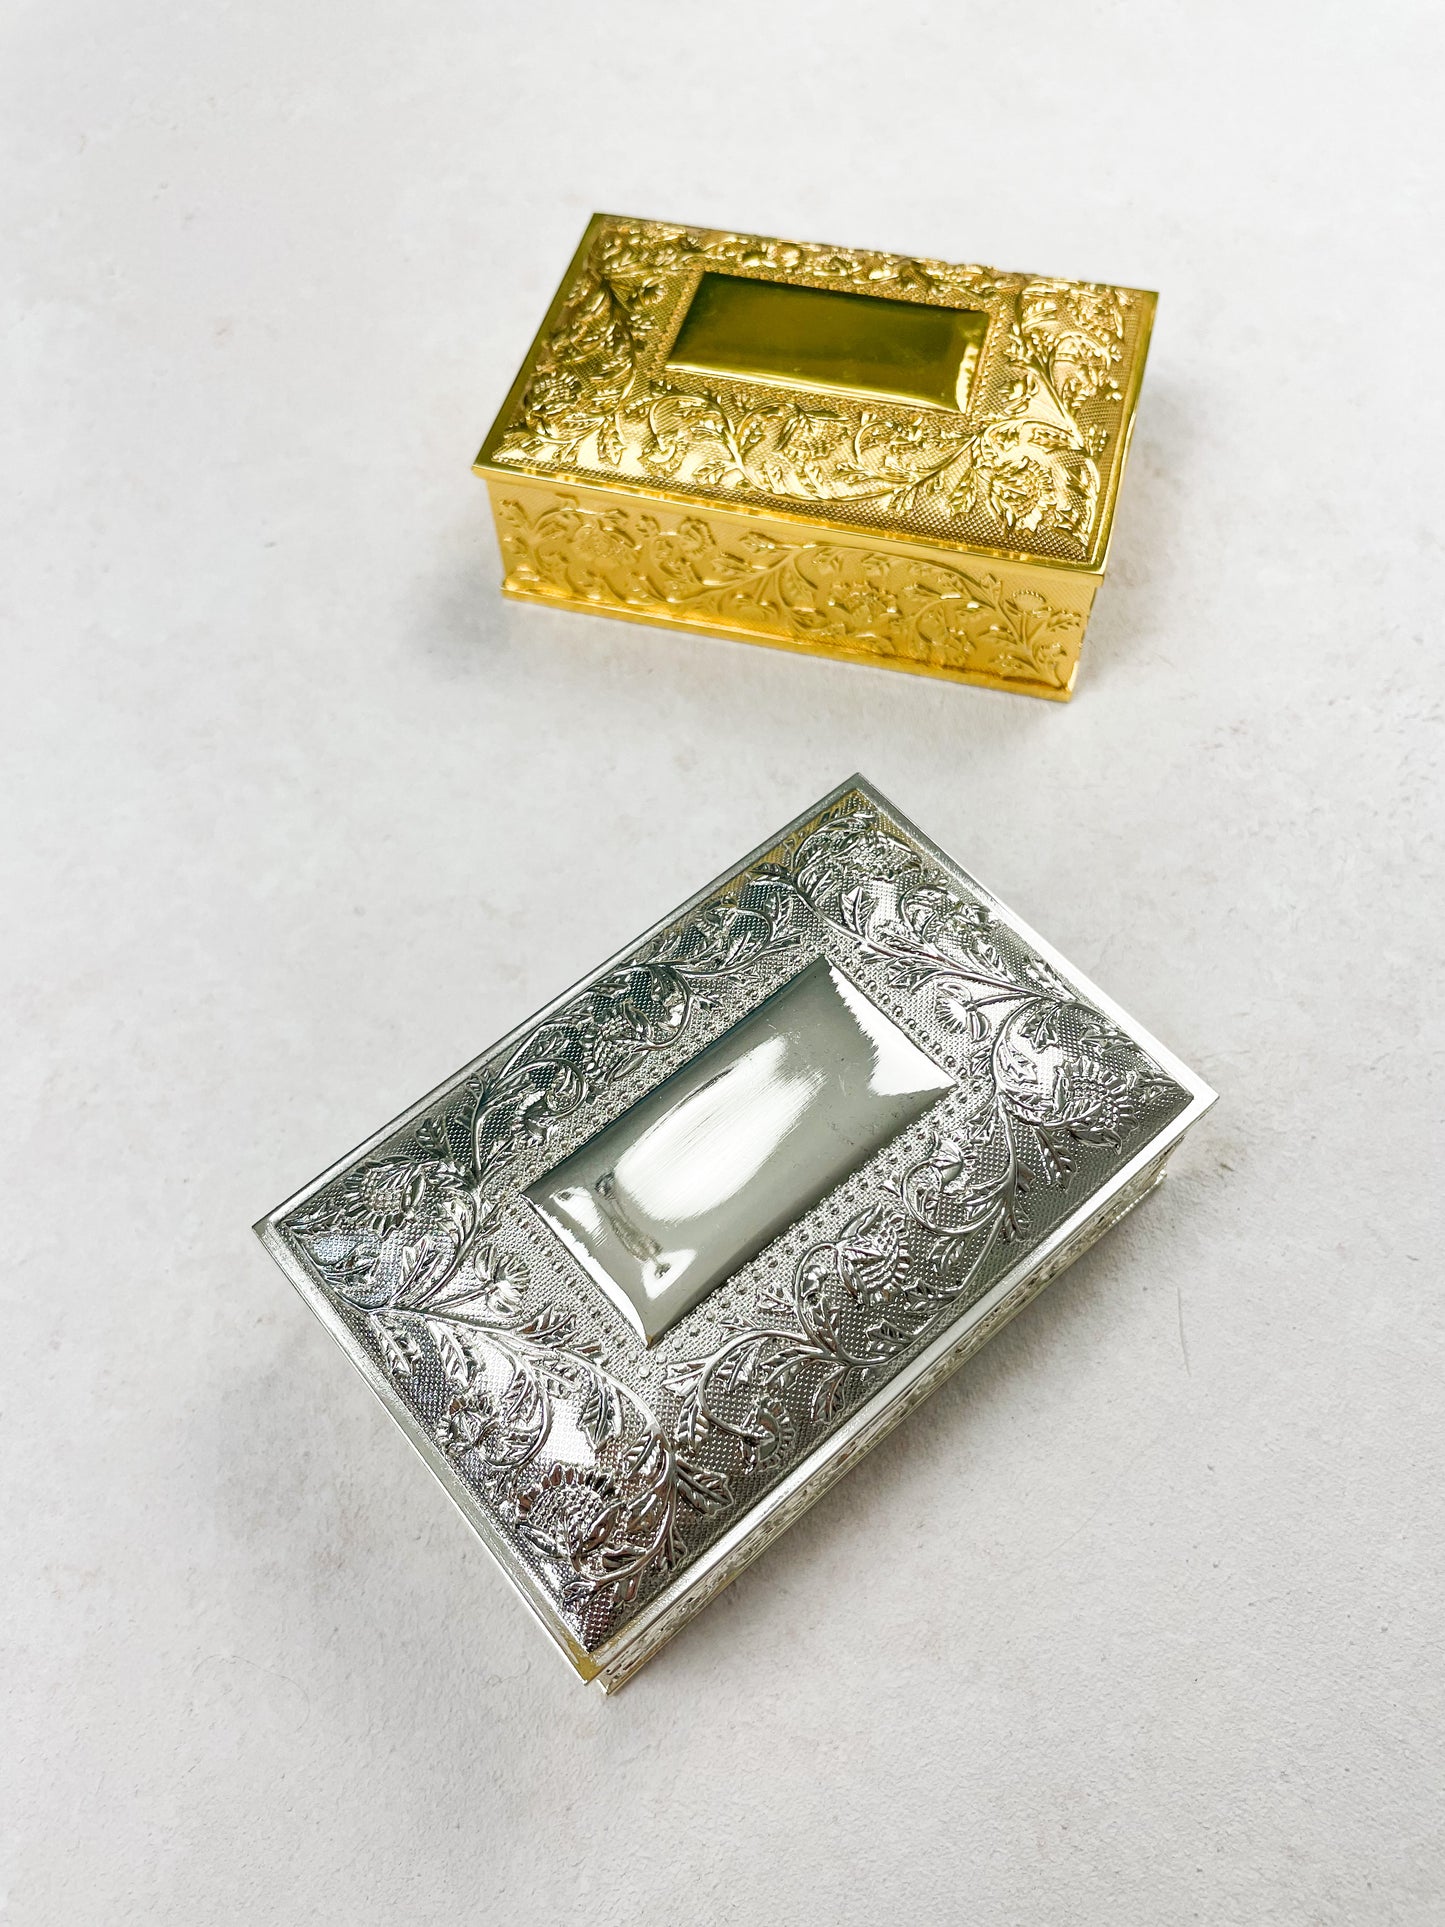 Vintage Mini Jewelry Box Gold or Silver | Wedding Flat Lay Props | Flat Lay Styling